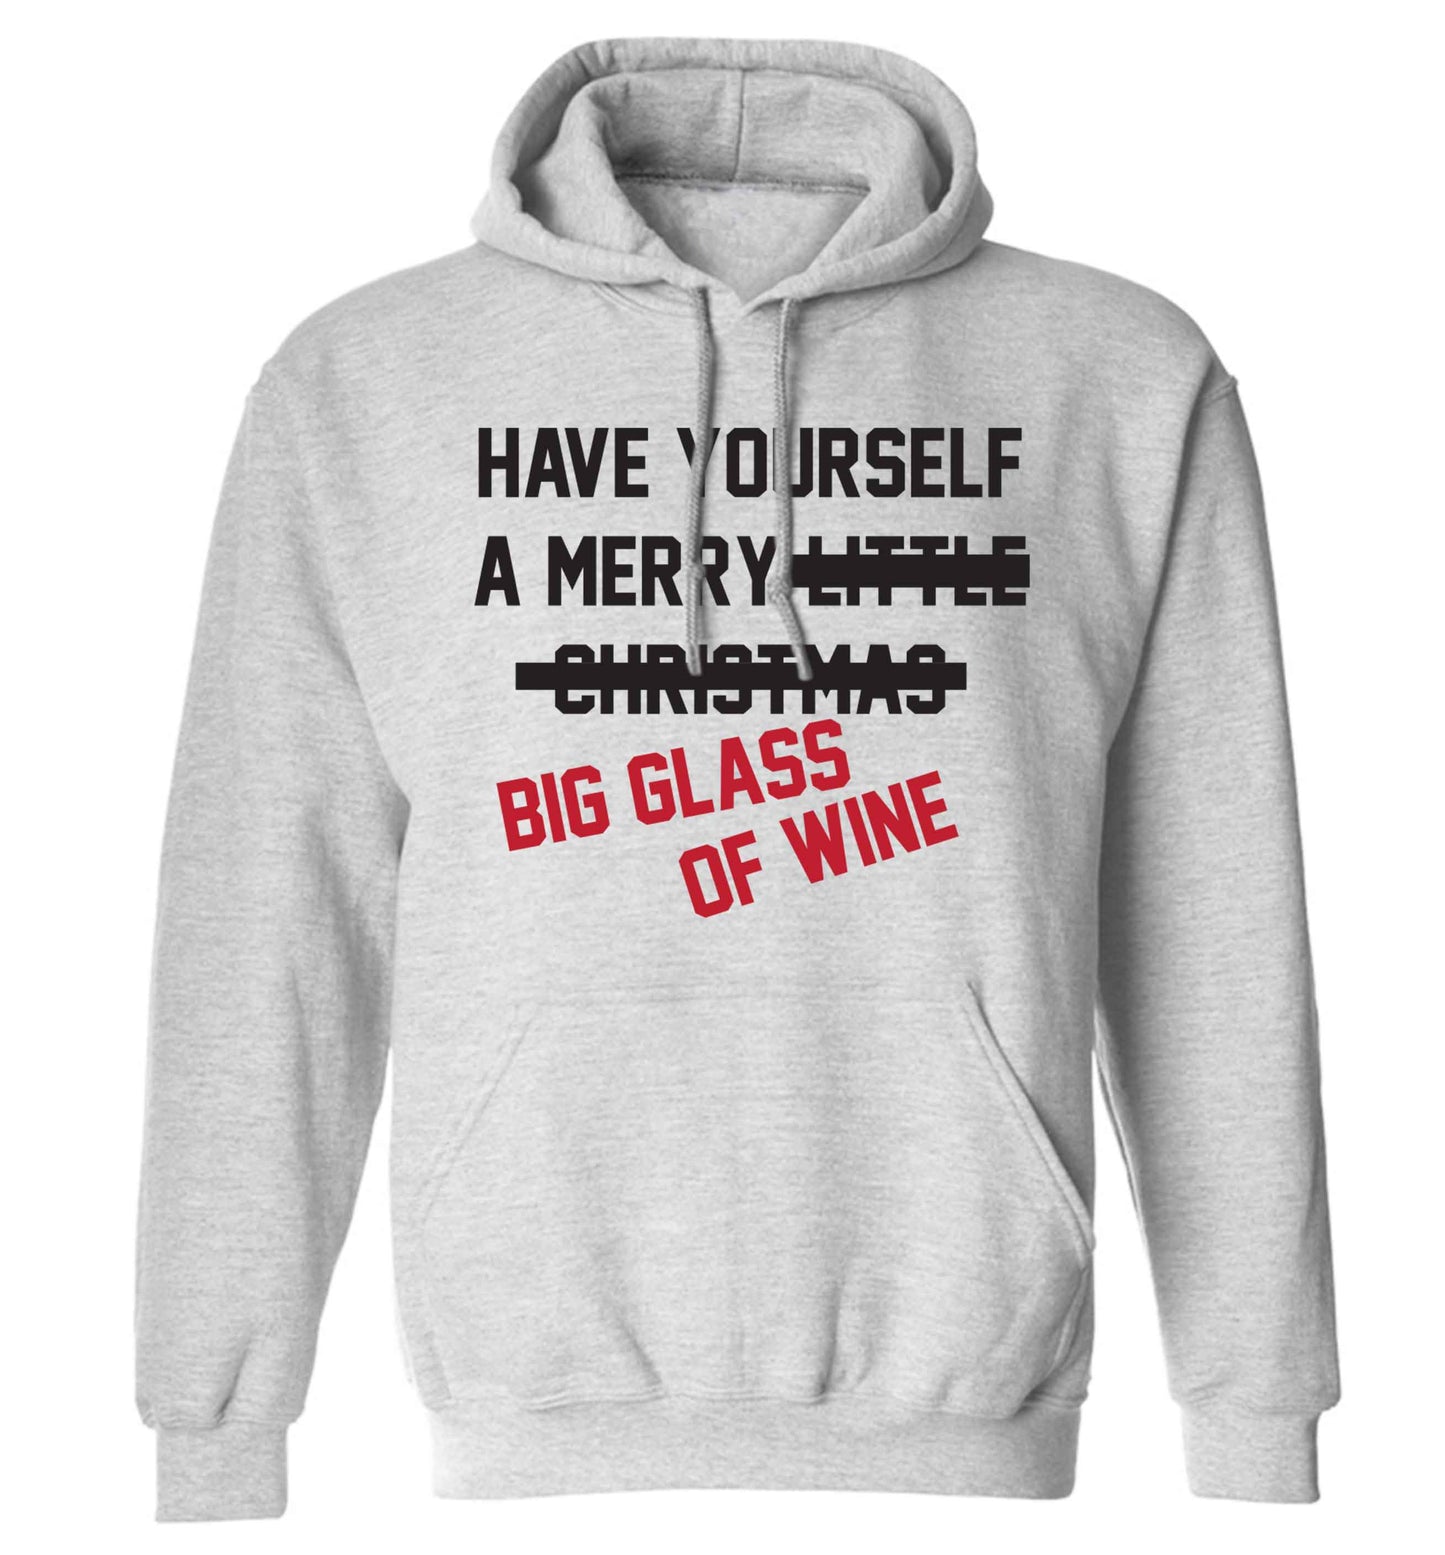 Have yourself a merry big glass of wine adults unisex grey hoodie 2XL